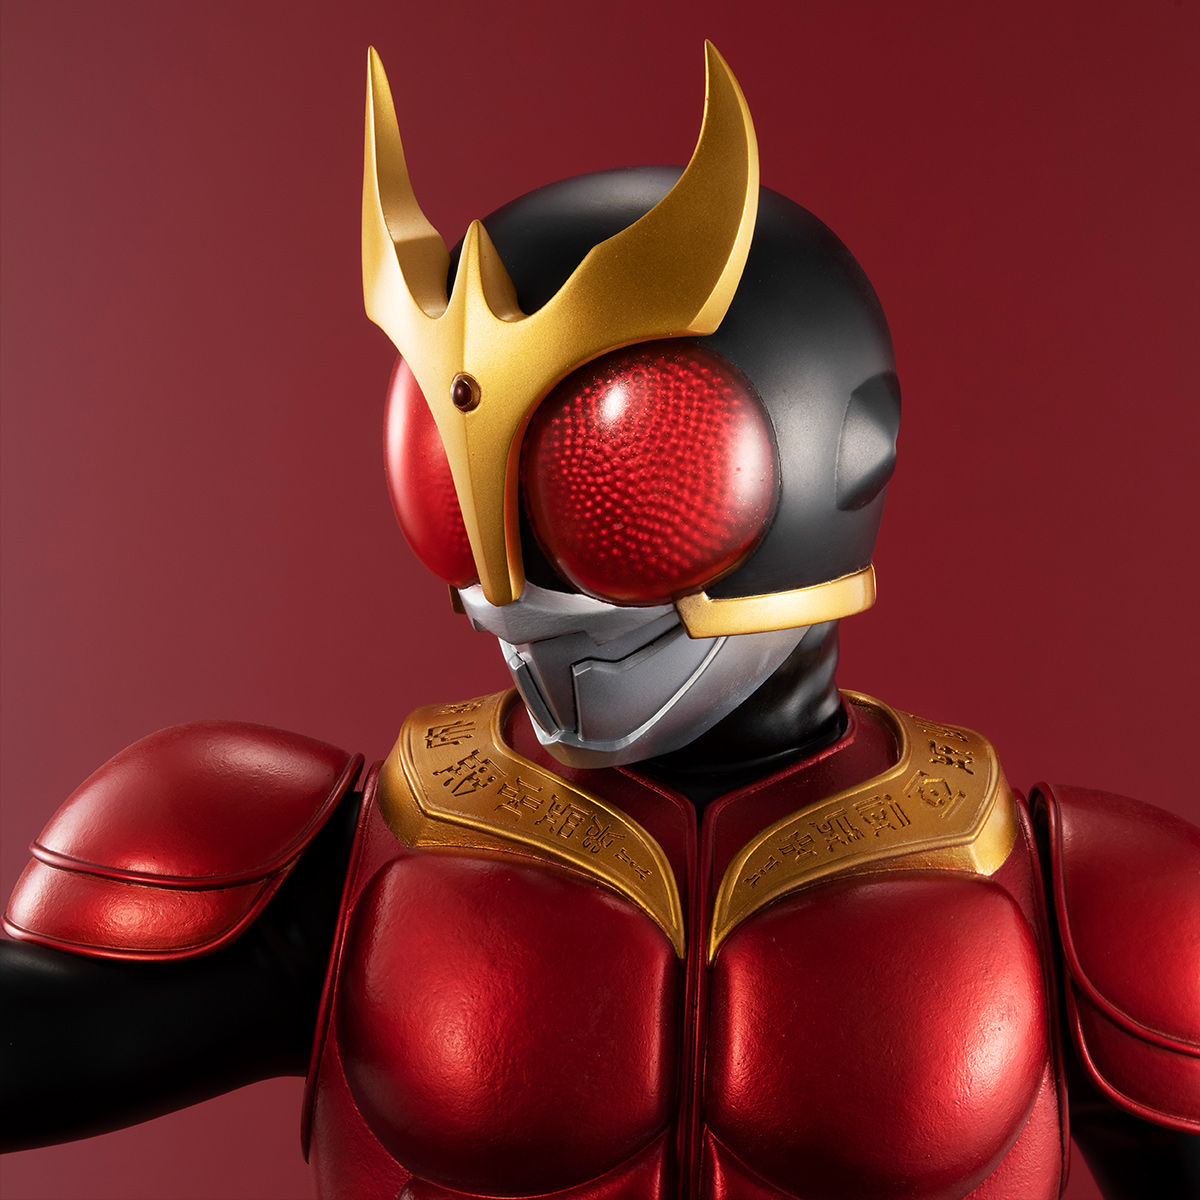 Ultimate Article 仮面ライダークウガ